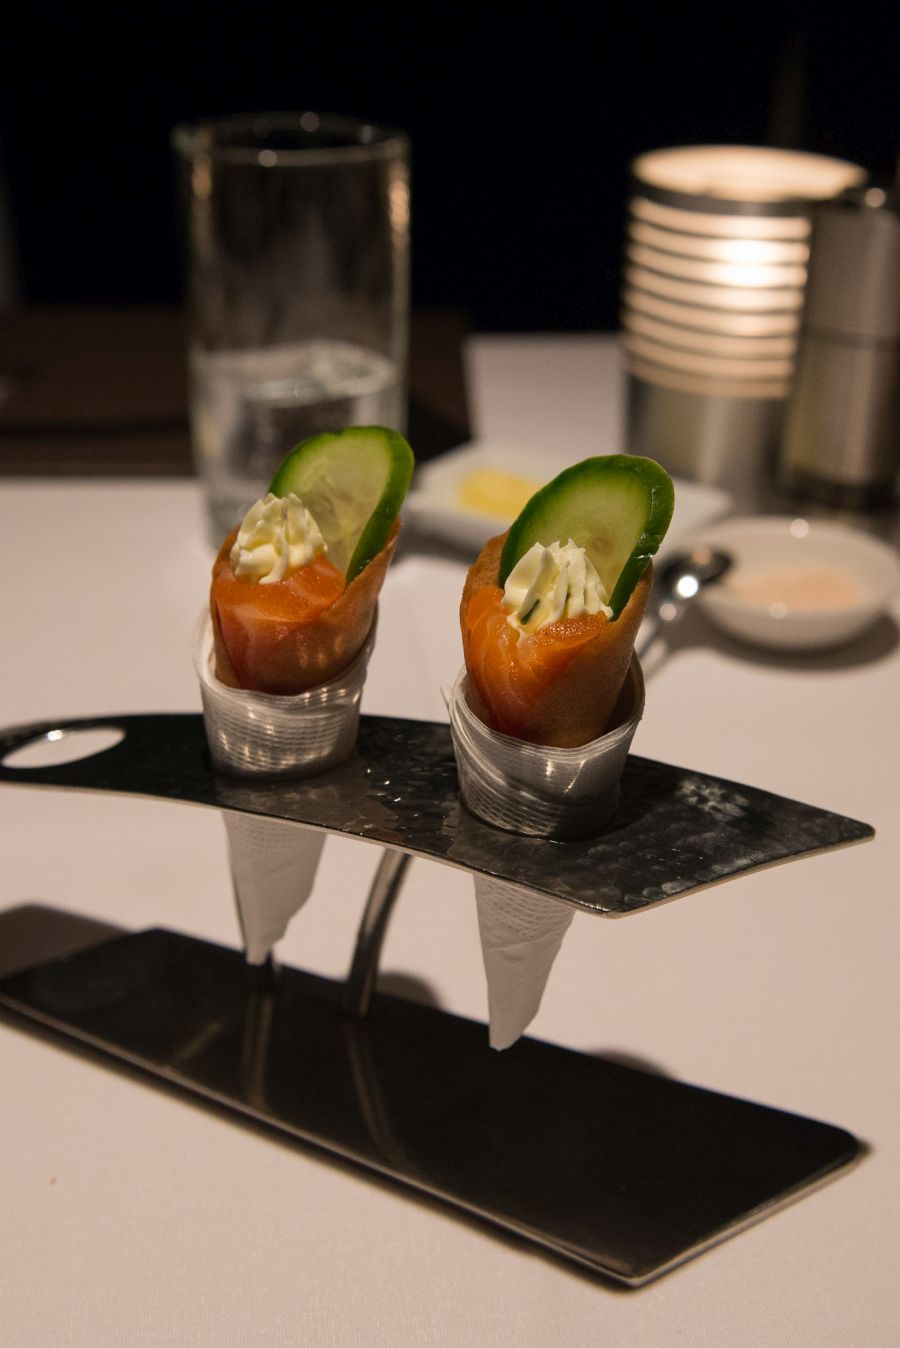 Amuse bouche - G&T cured salmon, cucumber and cream cheese in anchovy-flavoured cone